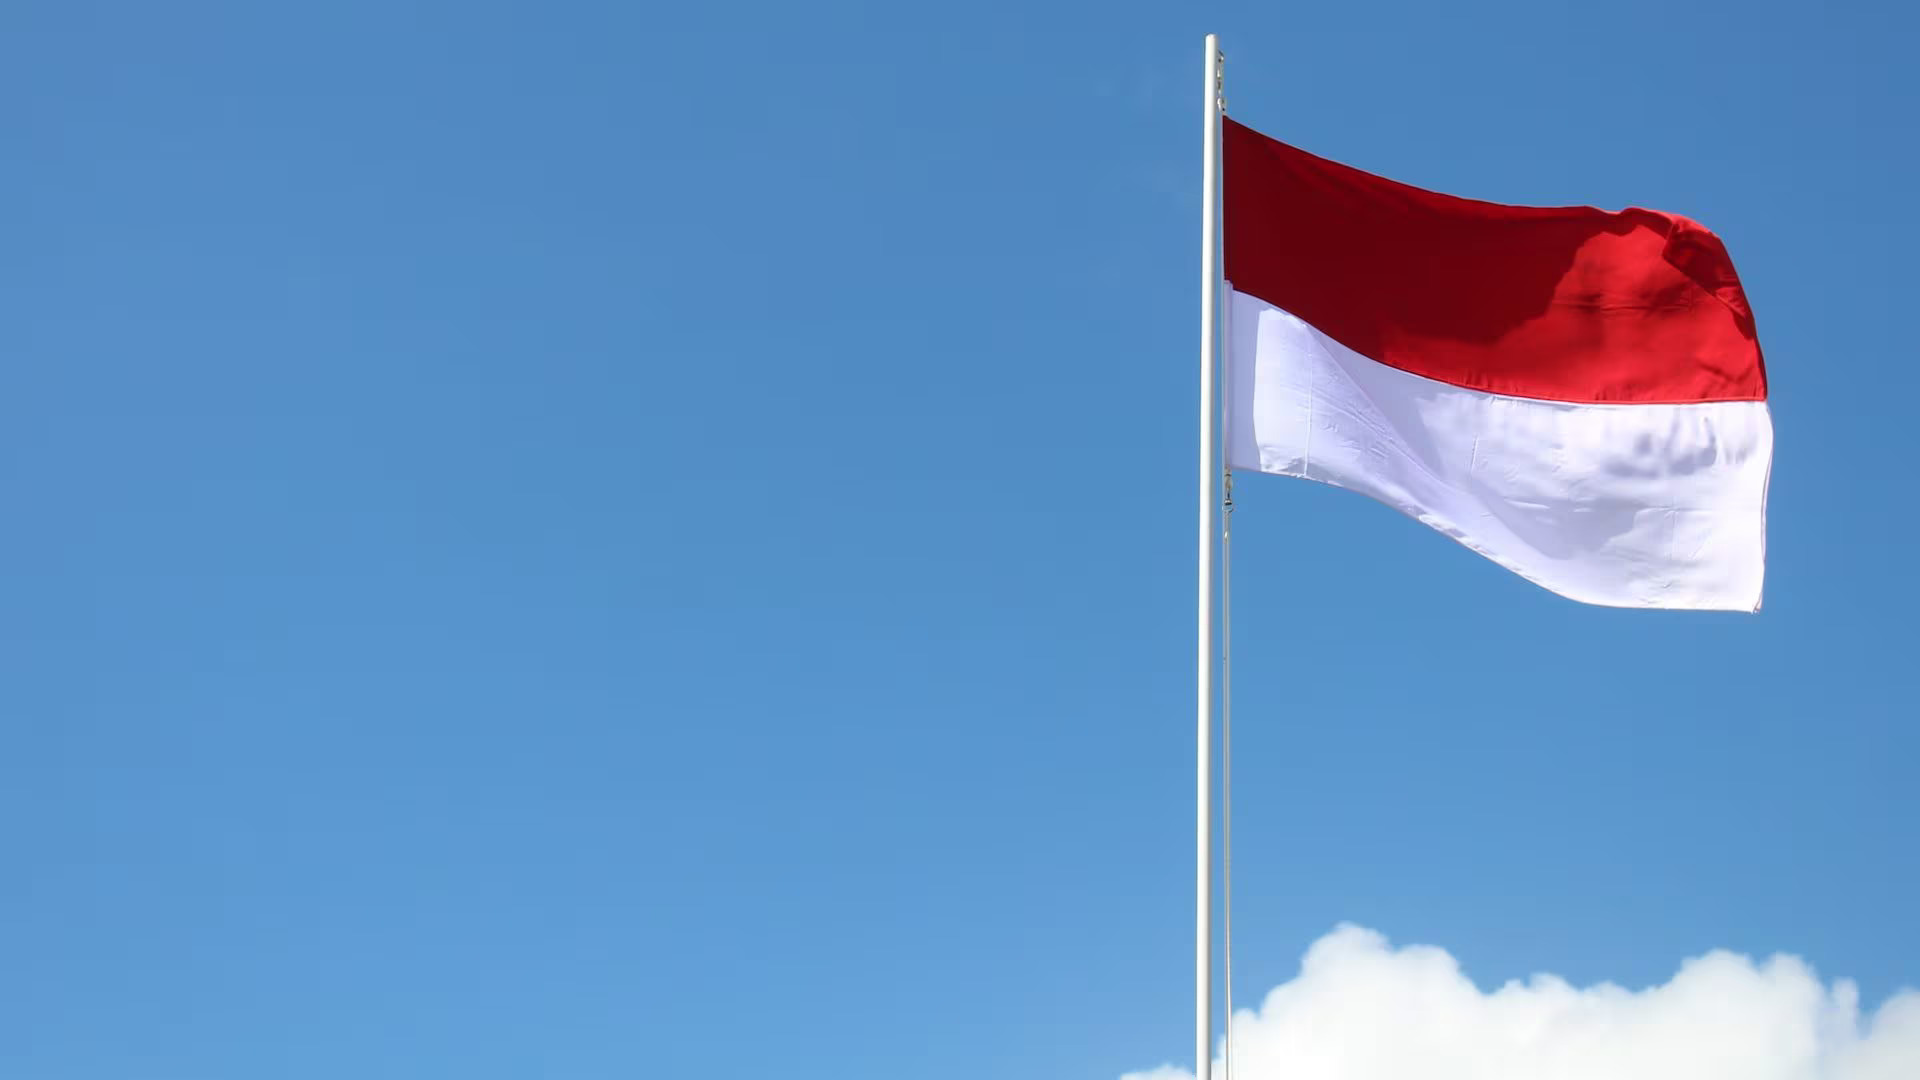 Indonesia's Presidential Election Could Mean More Support for Crypto